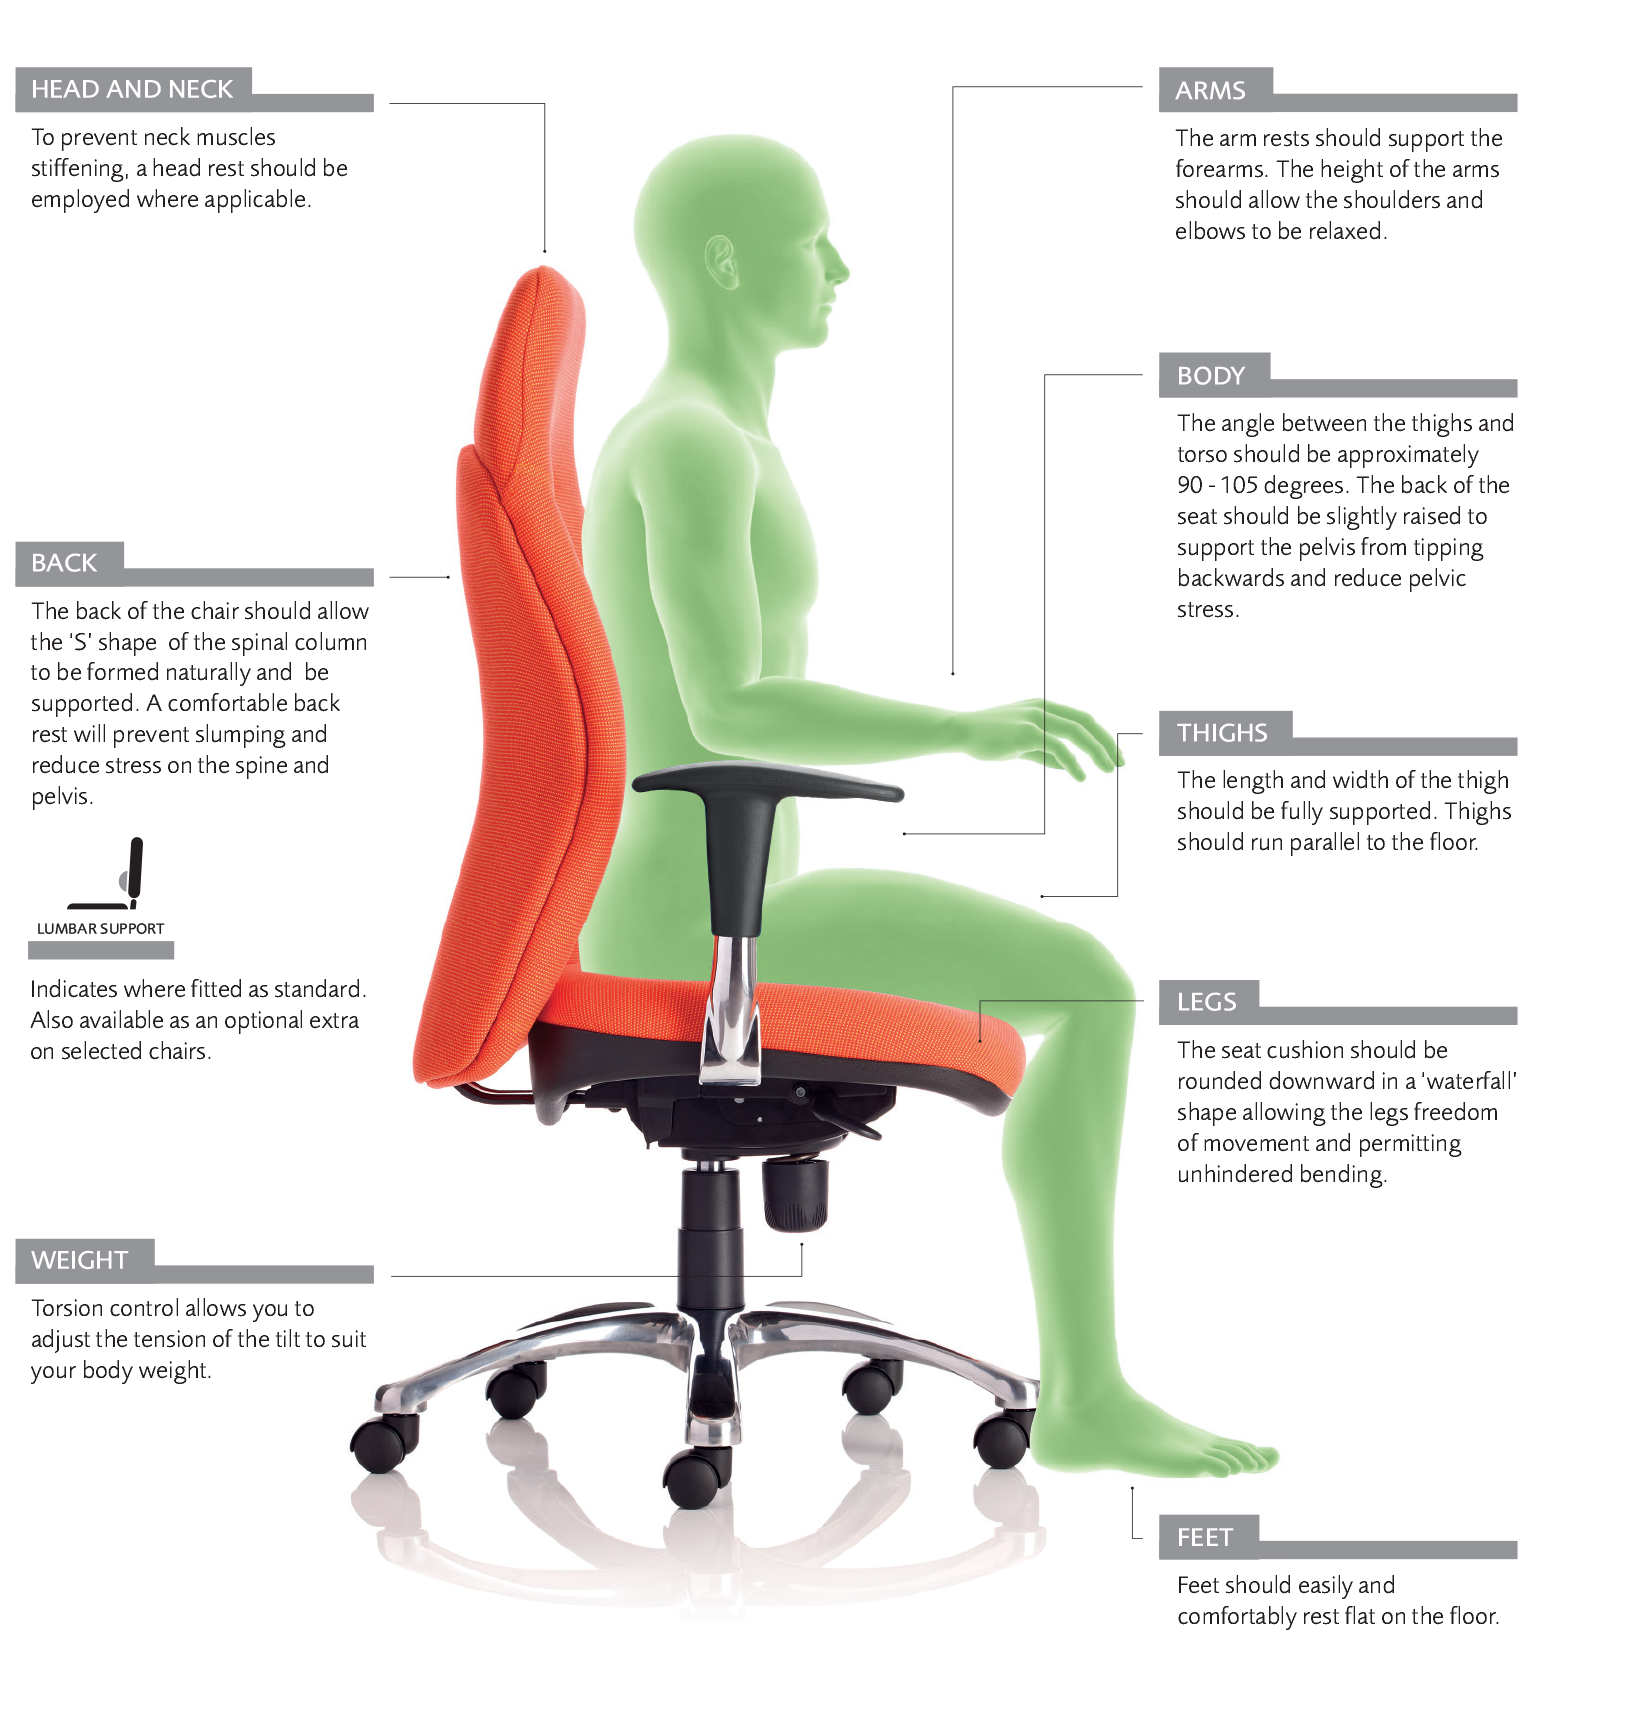 Sitting comfortably posture guide